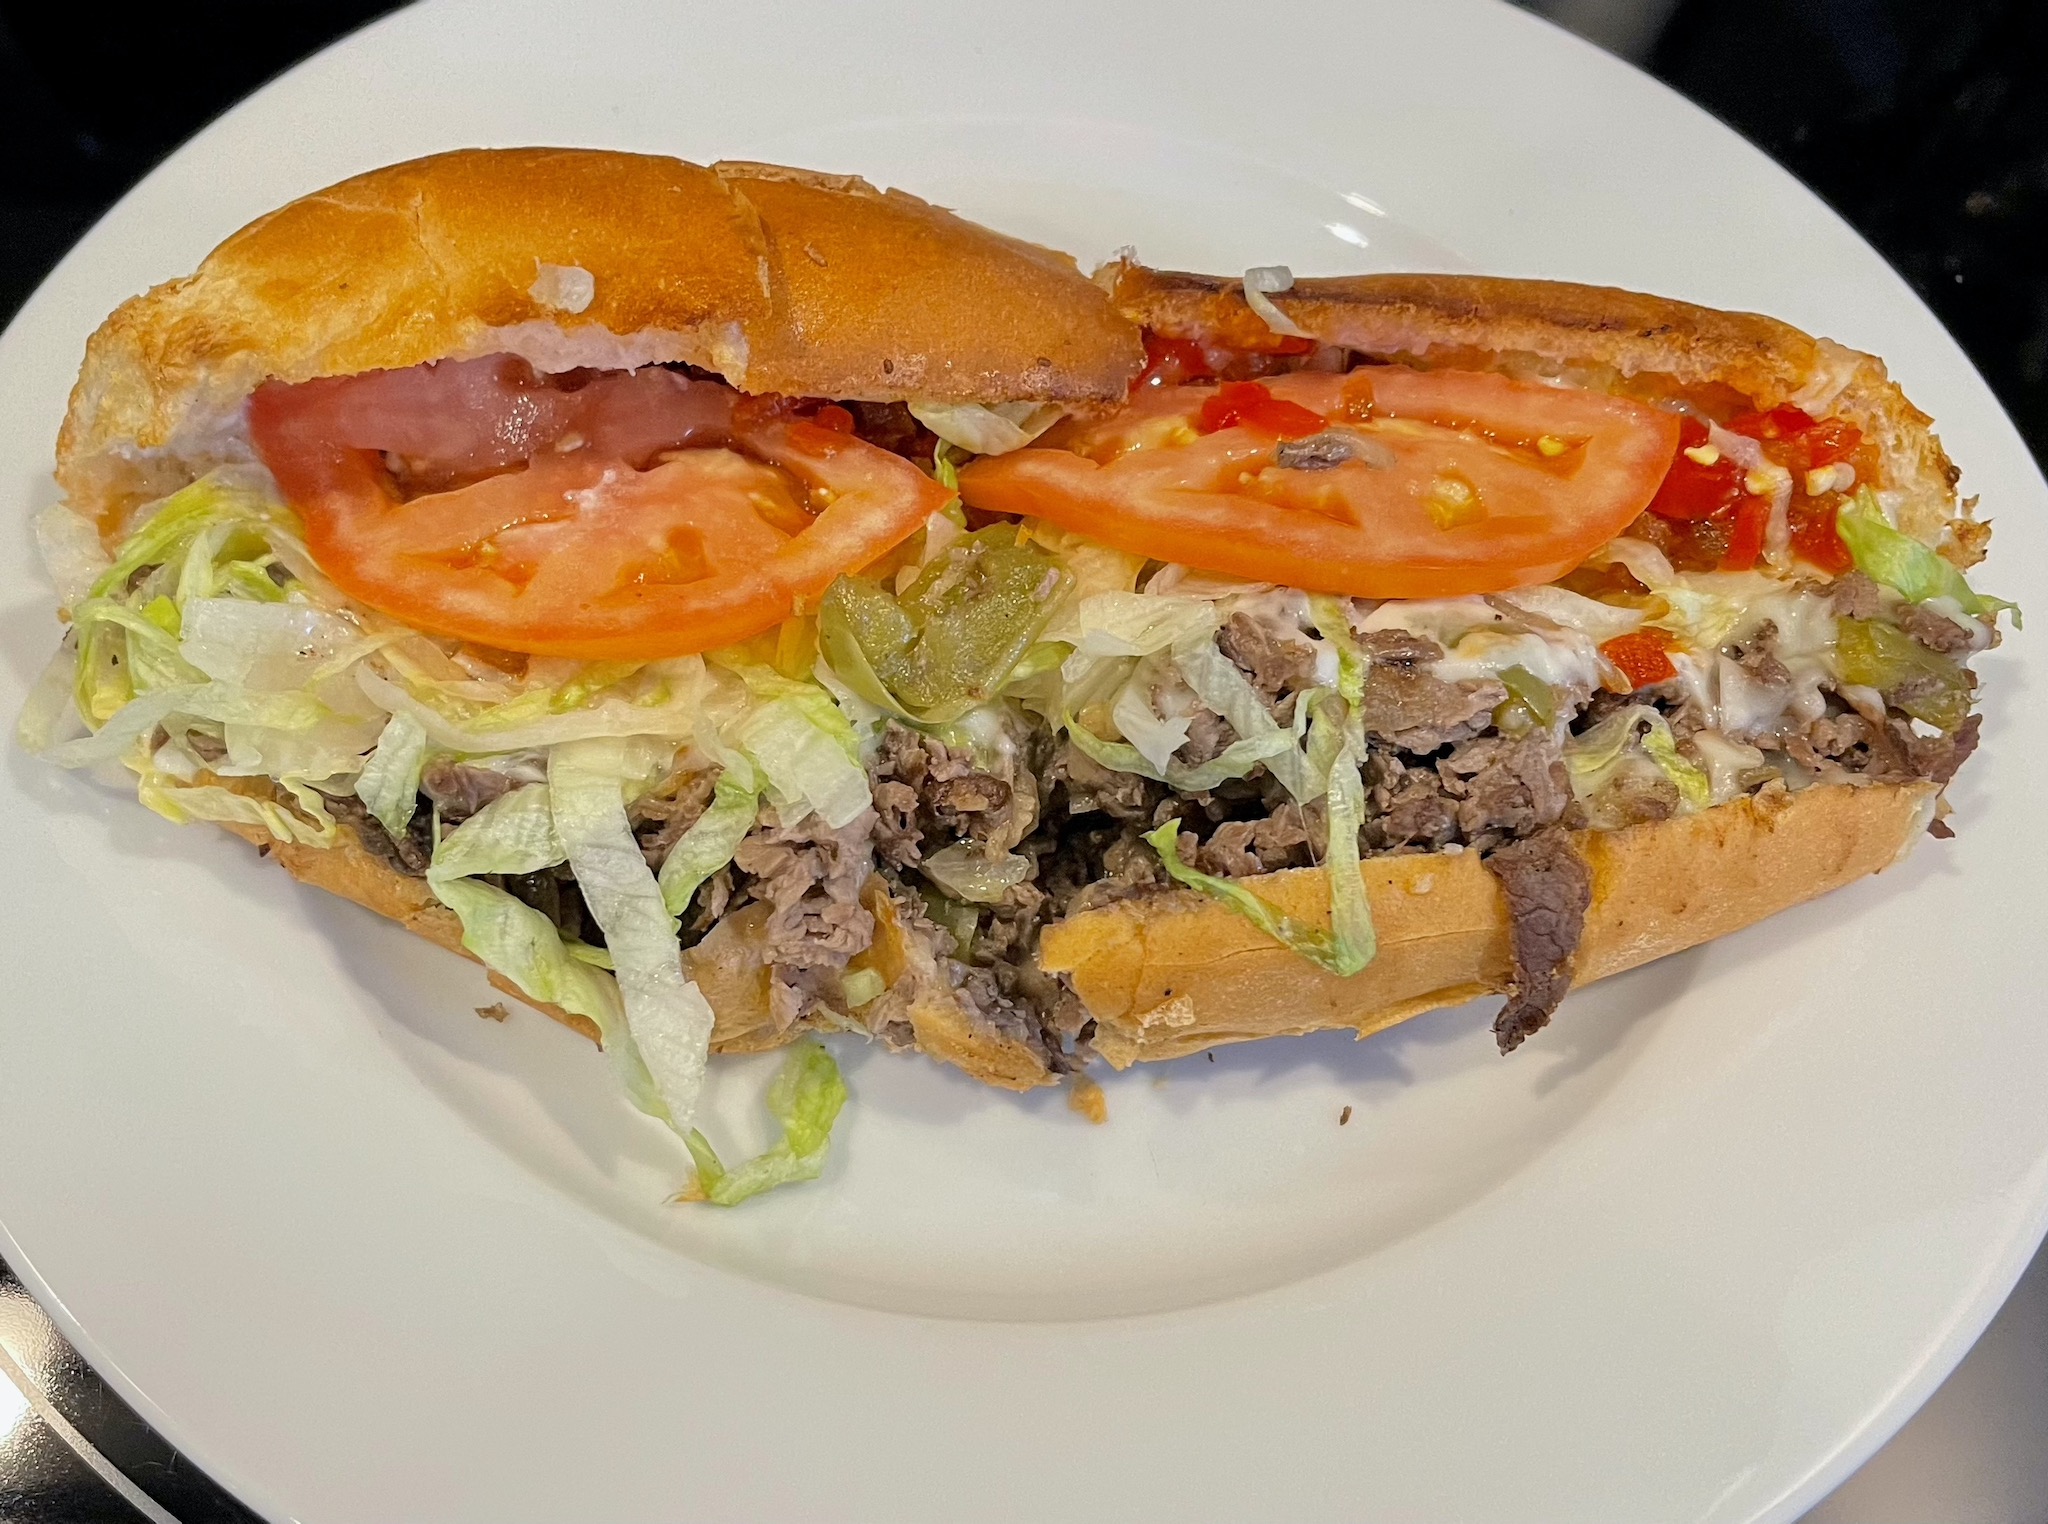 Nicko's Steak and Cheese Deluxe